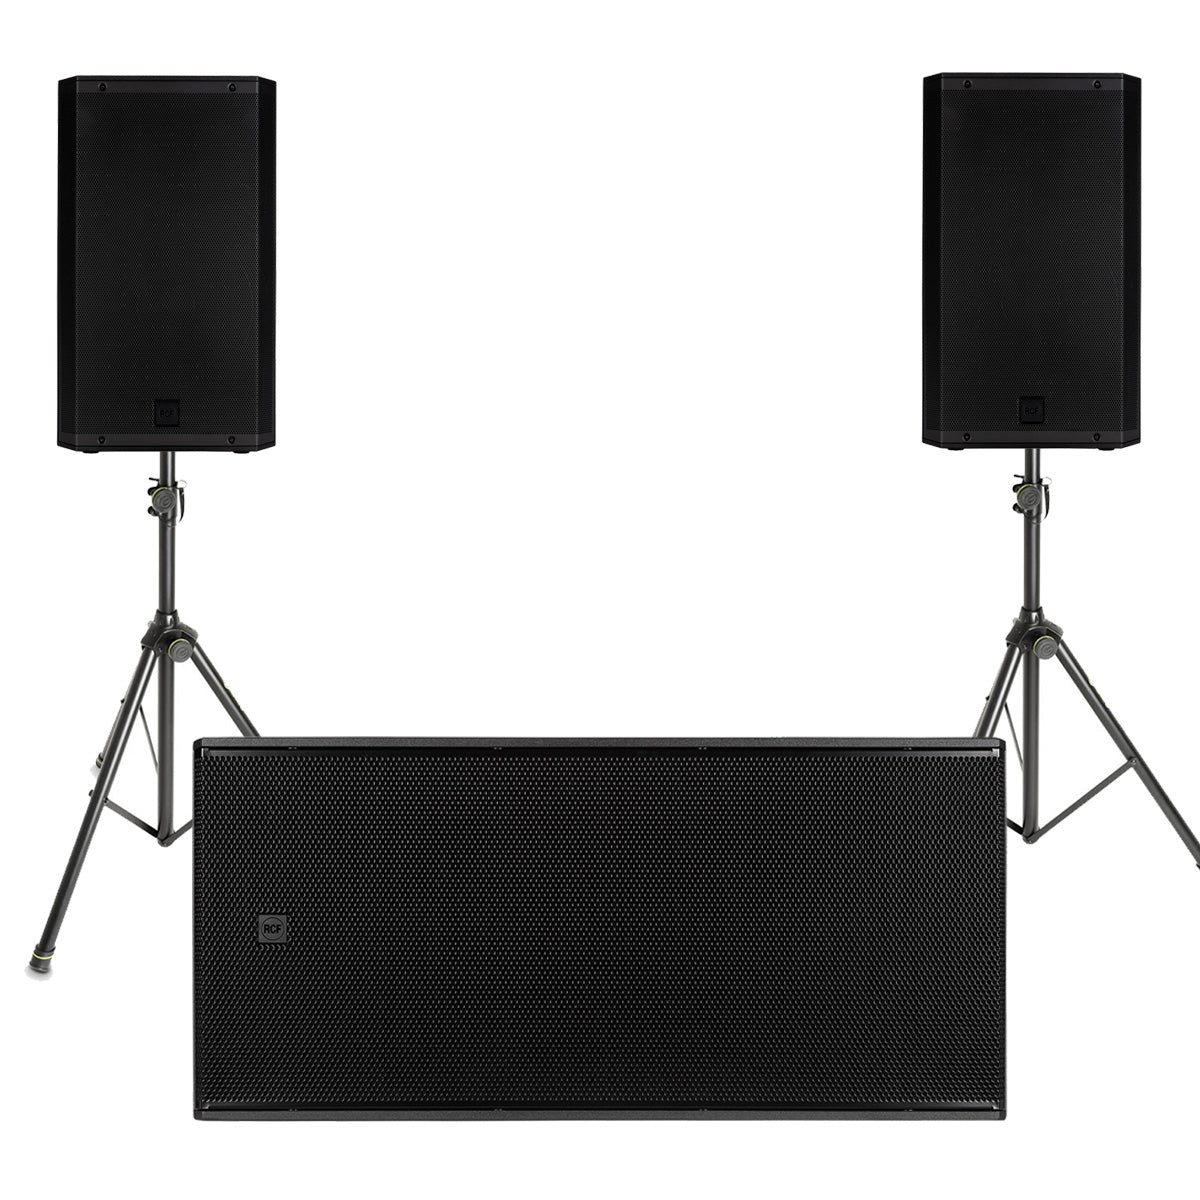 RCF 2 x ART945-A 1 x SUB 8008-AS PA System with Mono Sub